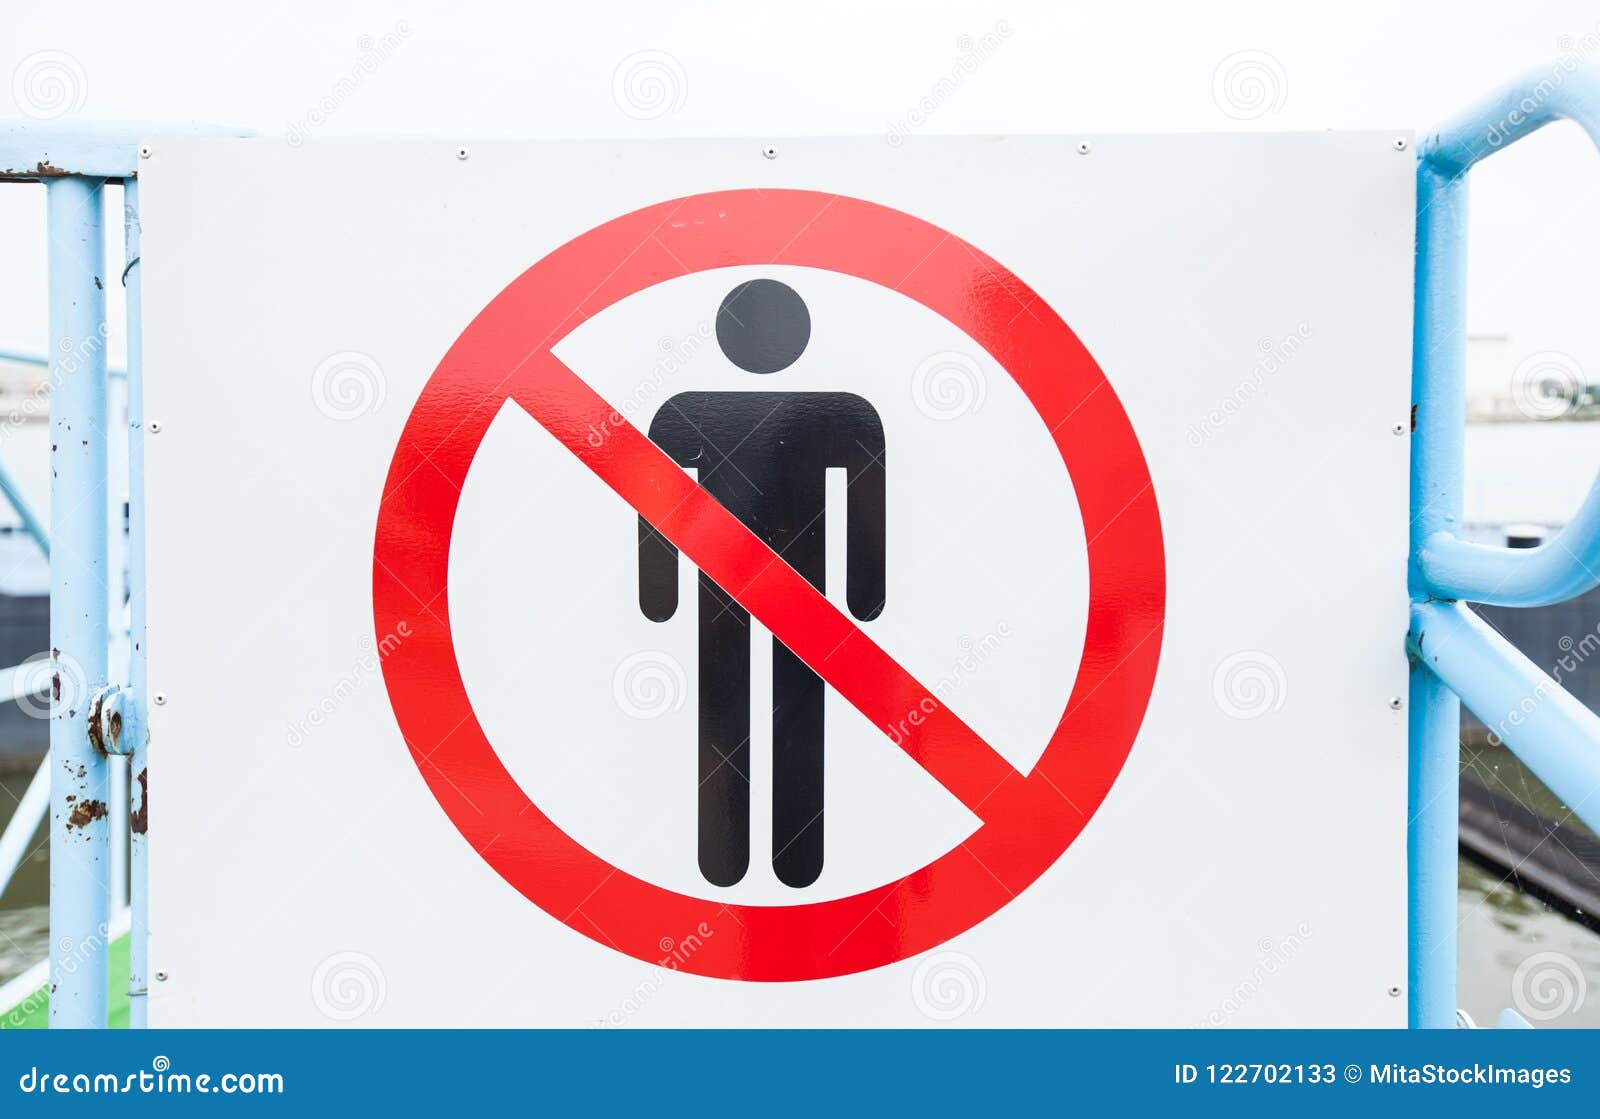 No People Allowed Sign Stock Photos 107 Images